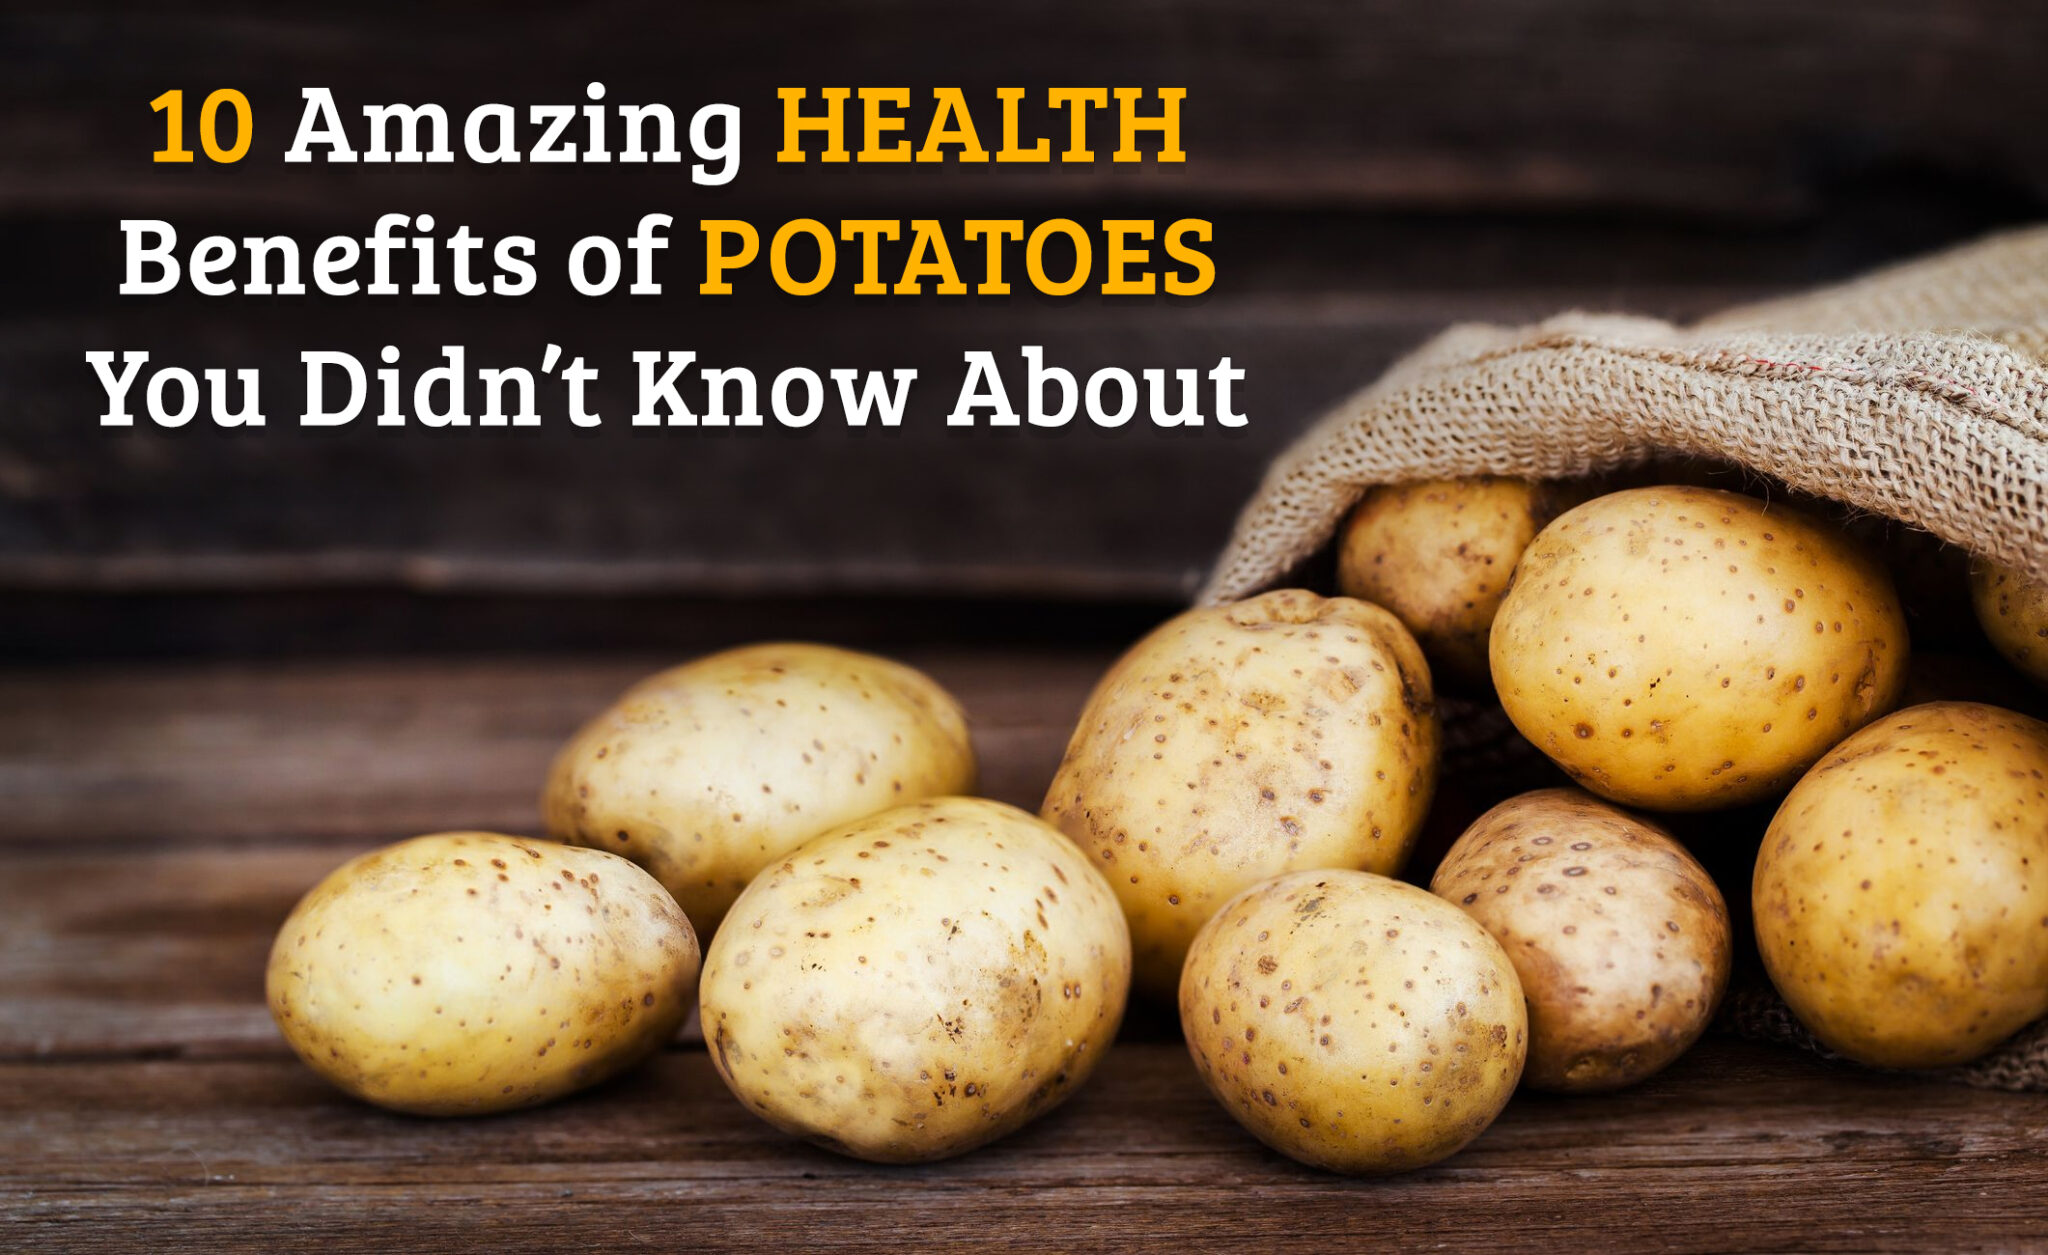 10 Amazing Health Benefits of Potatoes You Didn’t Know About